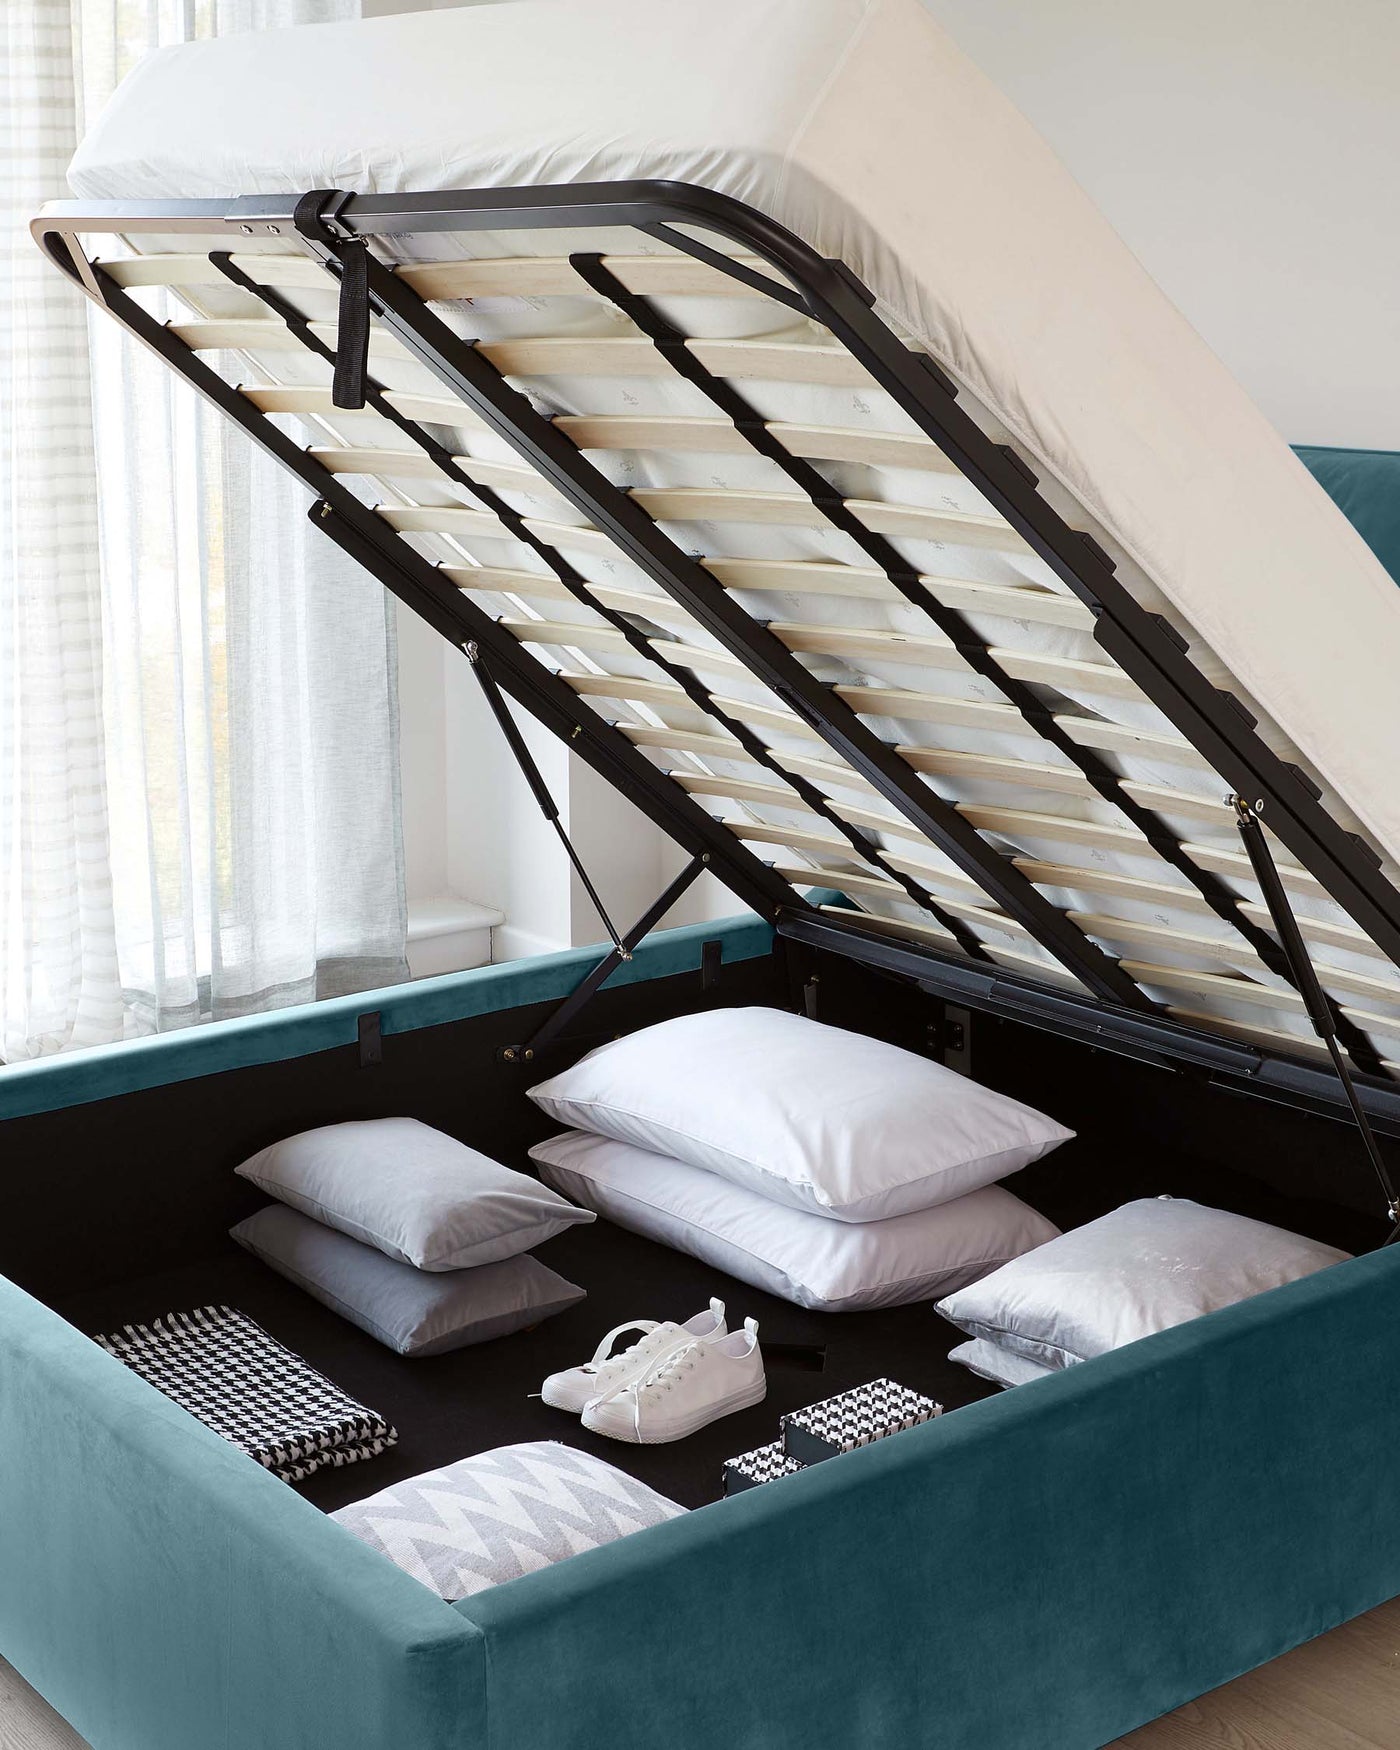 An upholstered storage bed with the mattress lifted to reveal a spacious interior compartment. The bed frame is finished in a teal fabric, complementing the contemporary design. The slatted mattress base is held open by a metal lifting mechanism, showcasing an organized storage space filled with pillows and personal items.